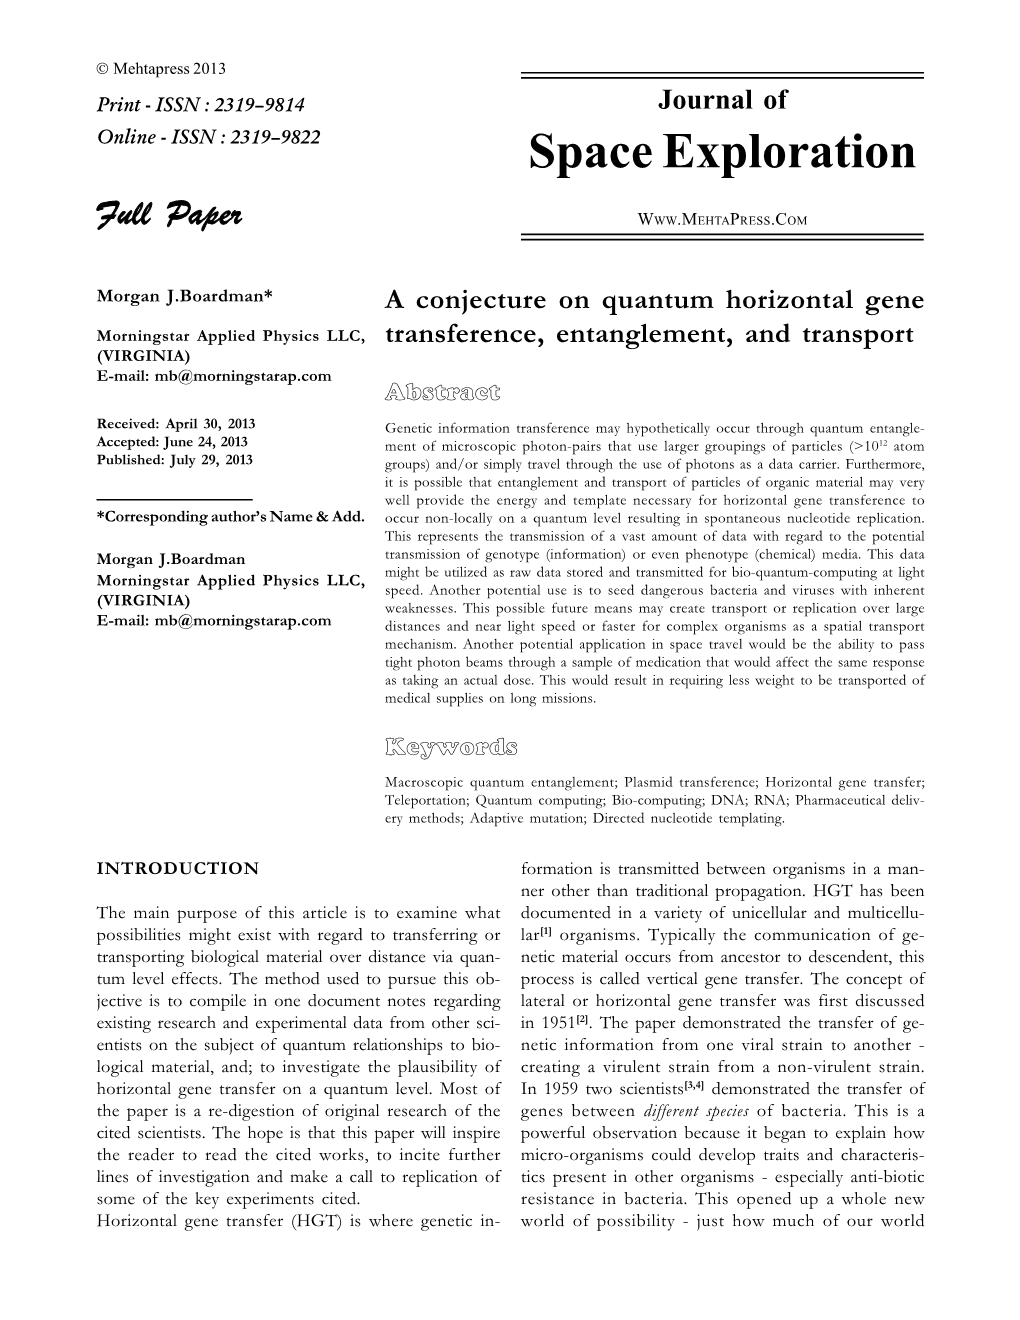 Evaluation of the Degradation of Solar Cells in Space